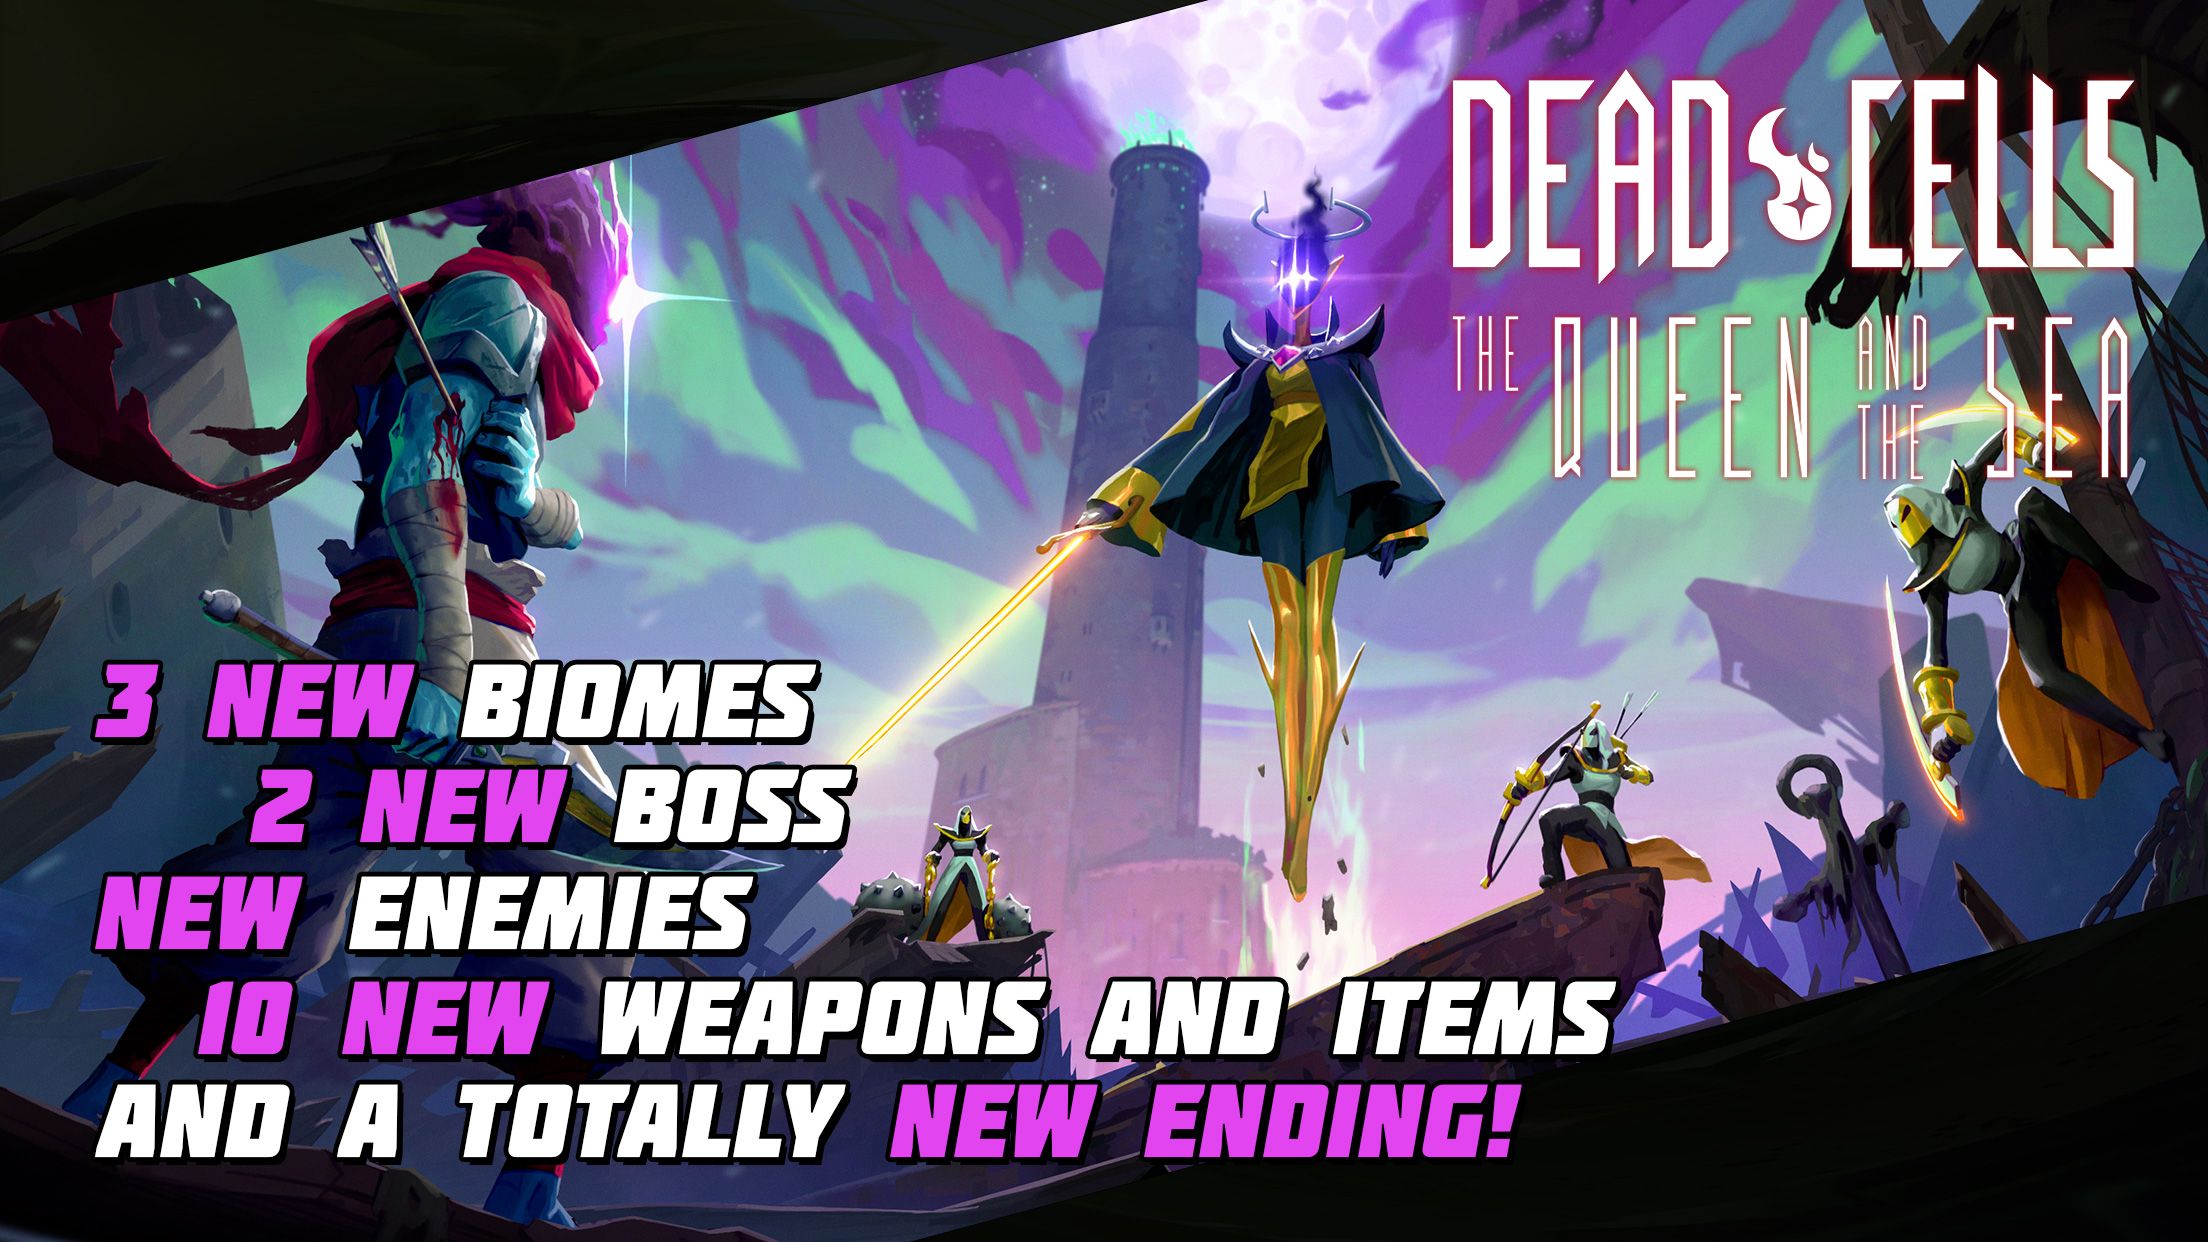 Dead Cells The Queen and the Sea DLC hero